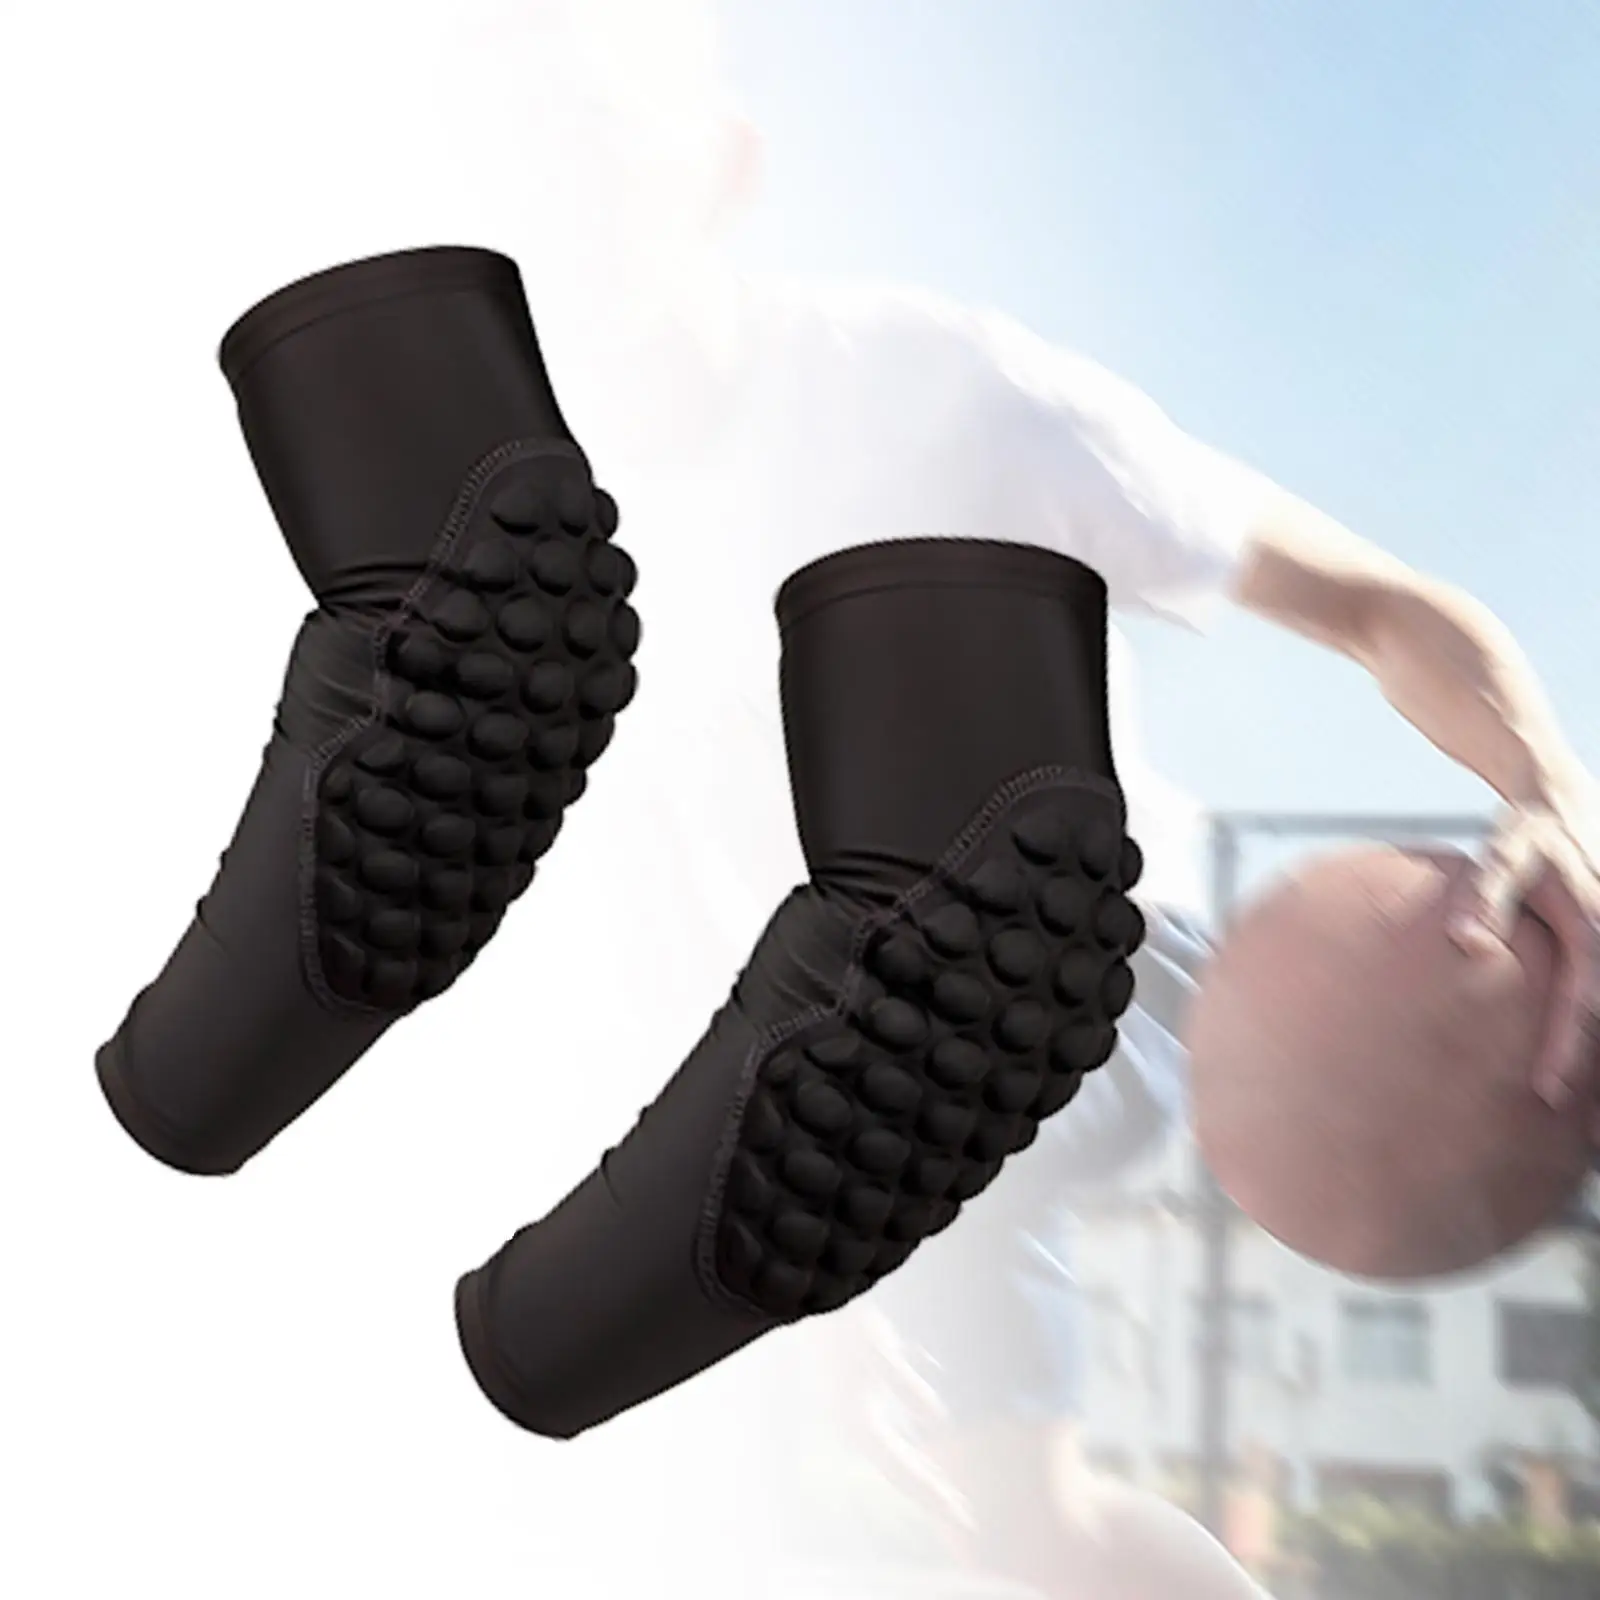 

Elbow Pads Stretchy Elbow Protector Arm Protection Forearm Padded AntiSlip Elbow Brace for Baseball Skating Volleyball Gym Sport